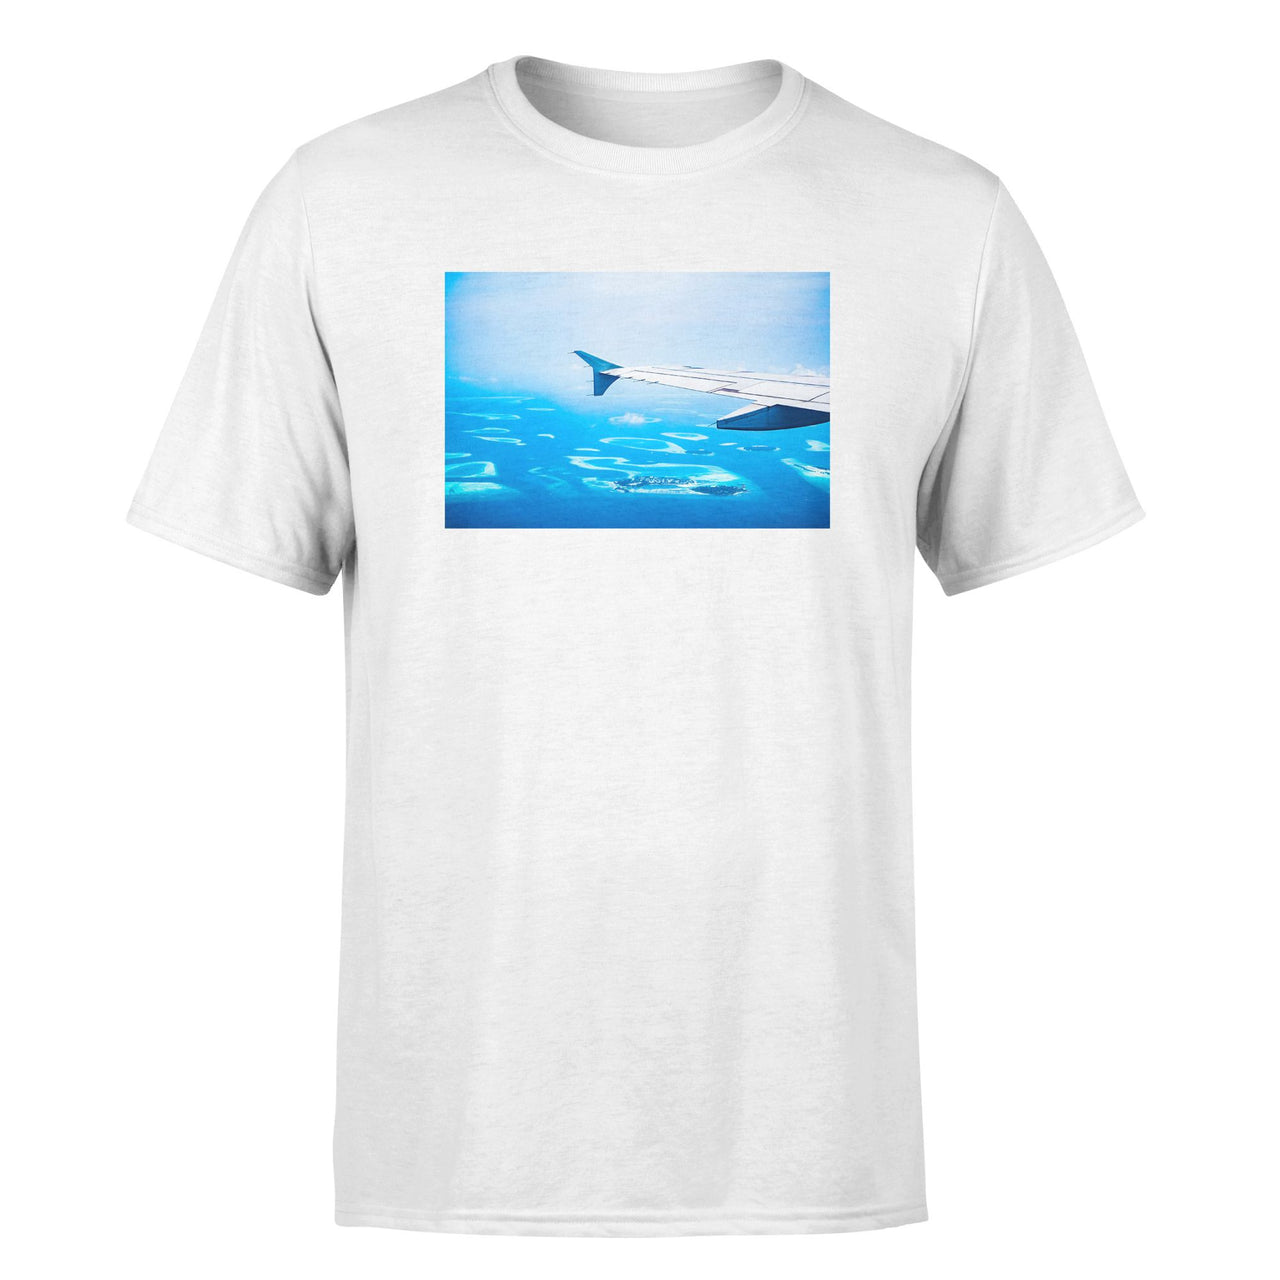 Outstanding View Through Airplane Wing Designed T-Shirts